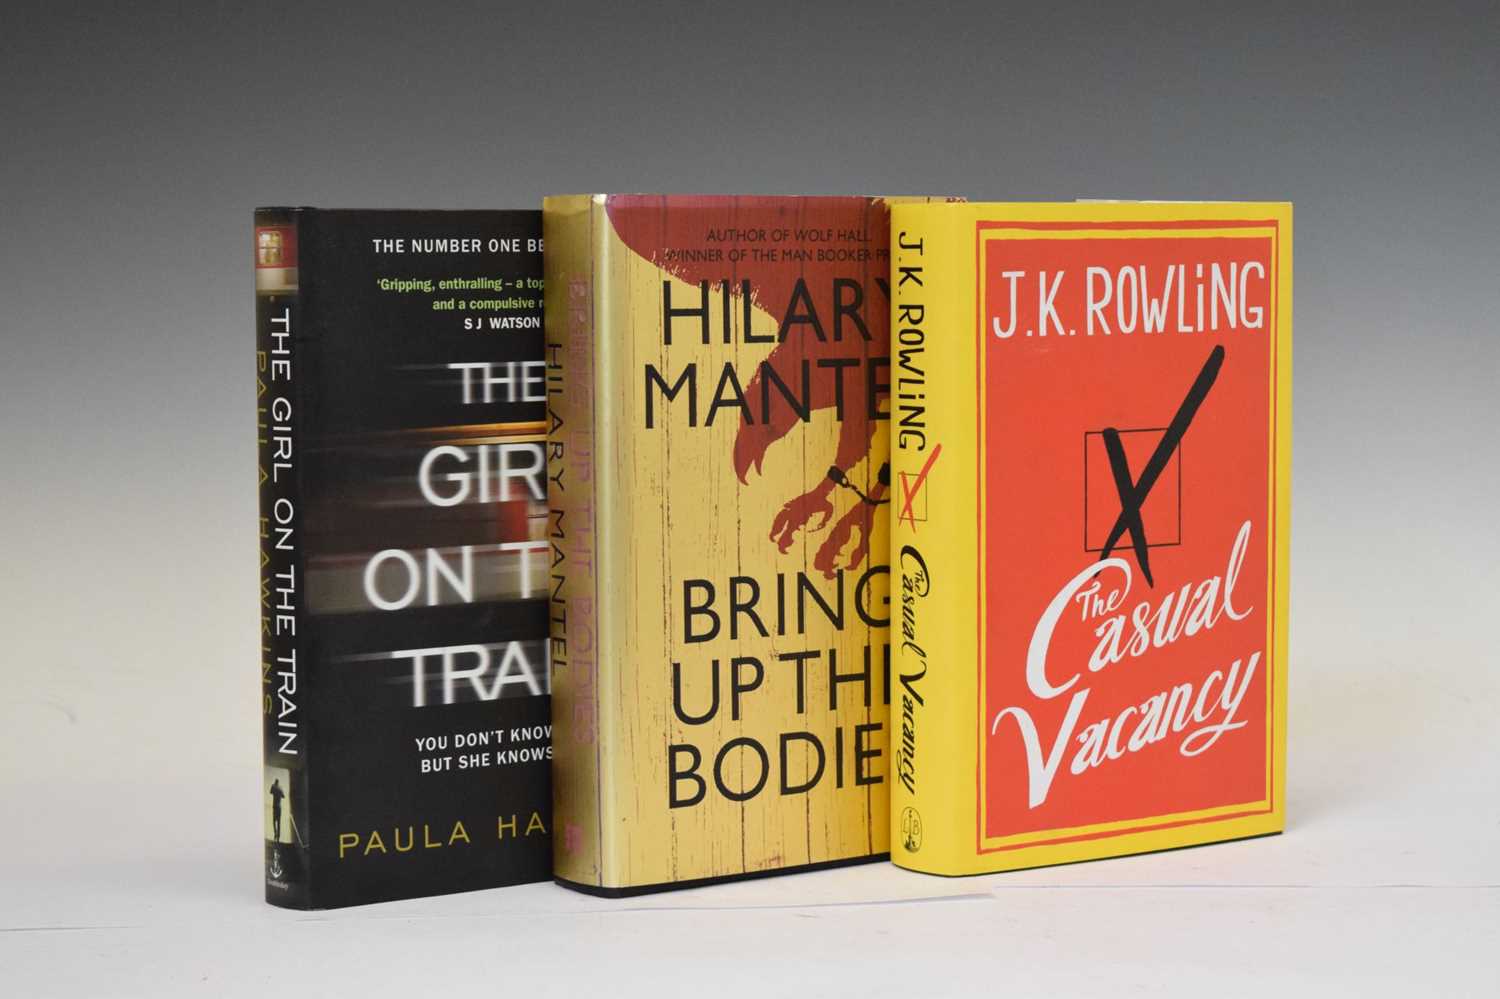 Rowling, J. K. - 'The Casual Vacancy' - First Edition, etc - Image 15 of 15